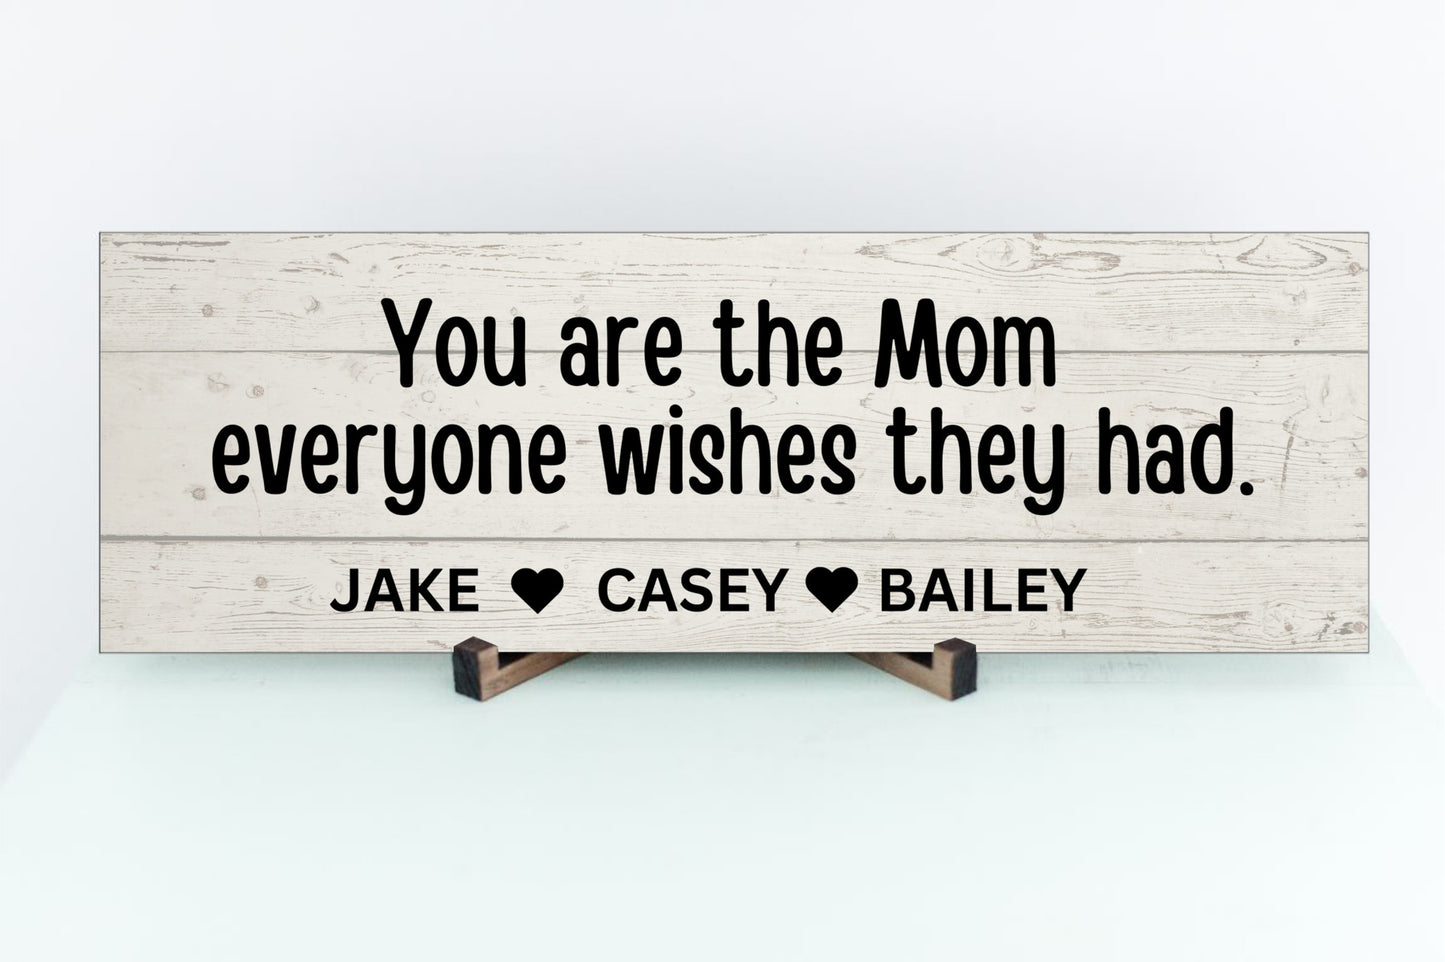 Mom everyone wishes Personalized Sign-Price includes SHIPPING!